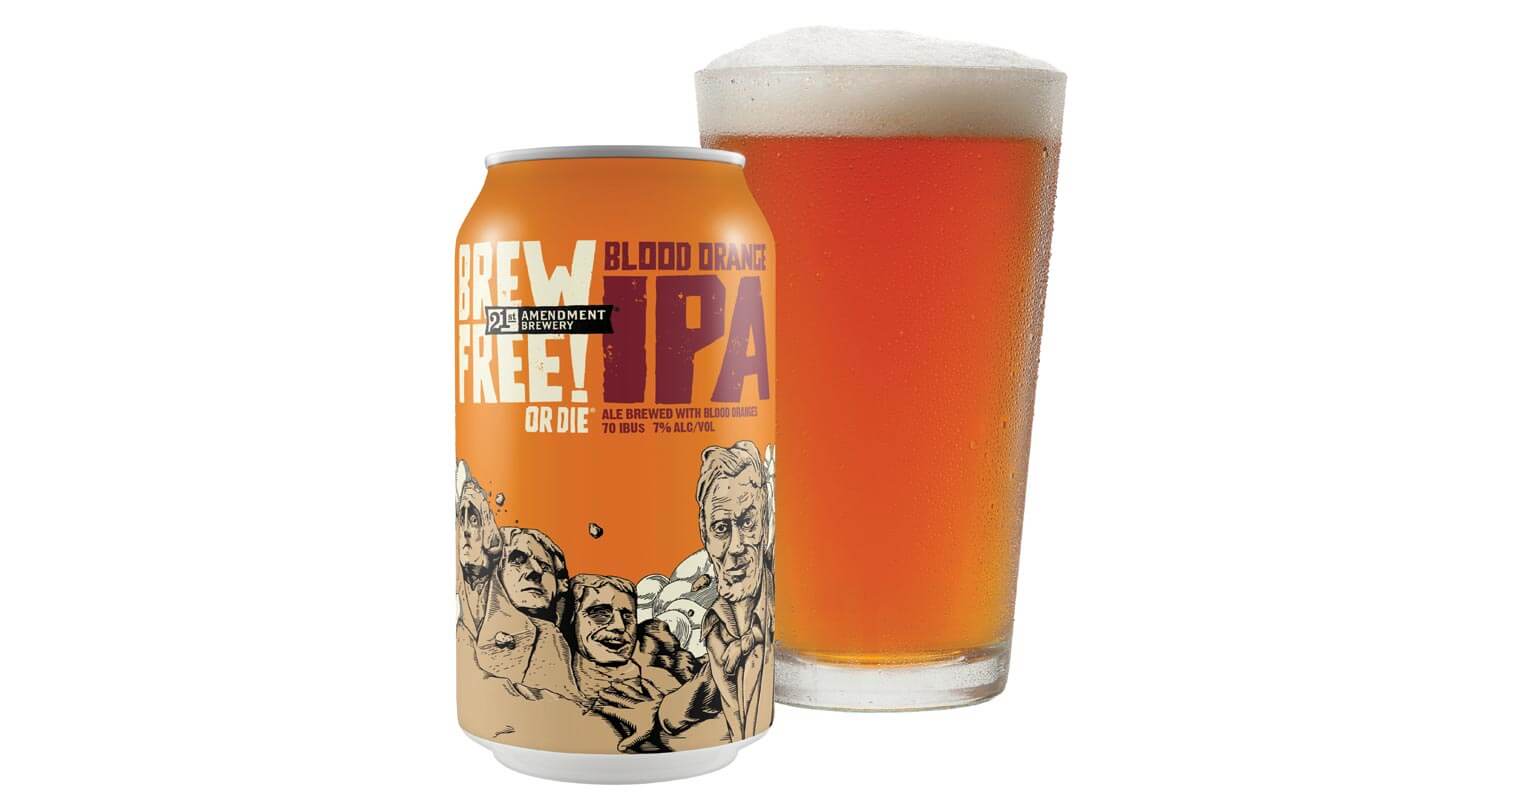 21st Amendment Brewery Launches Blood Orange IPA, featured image